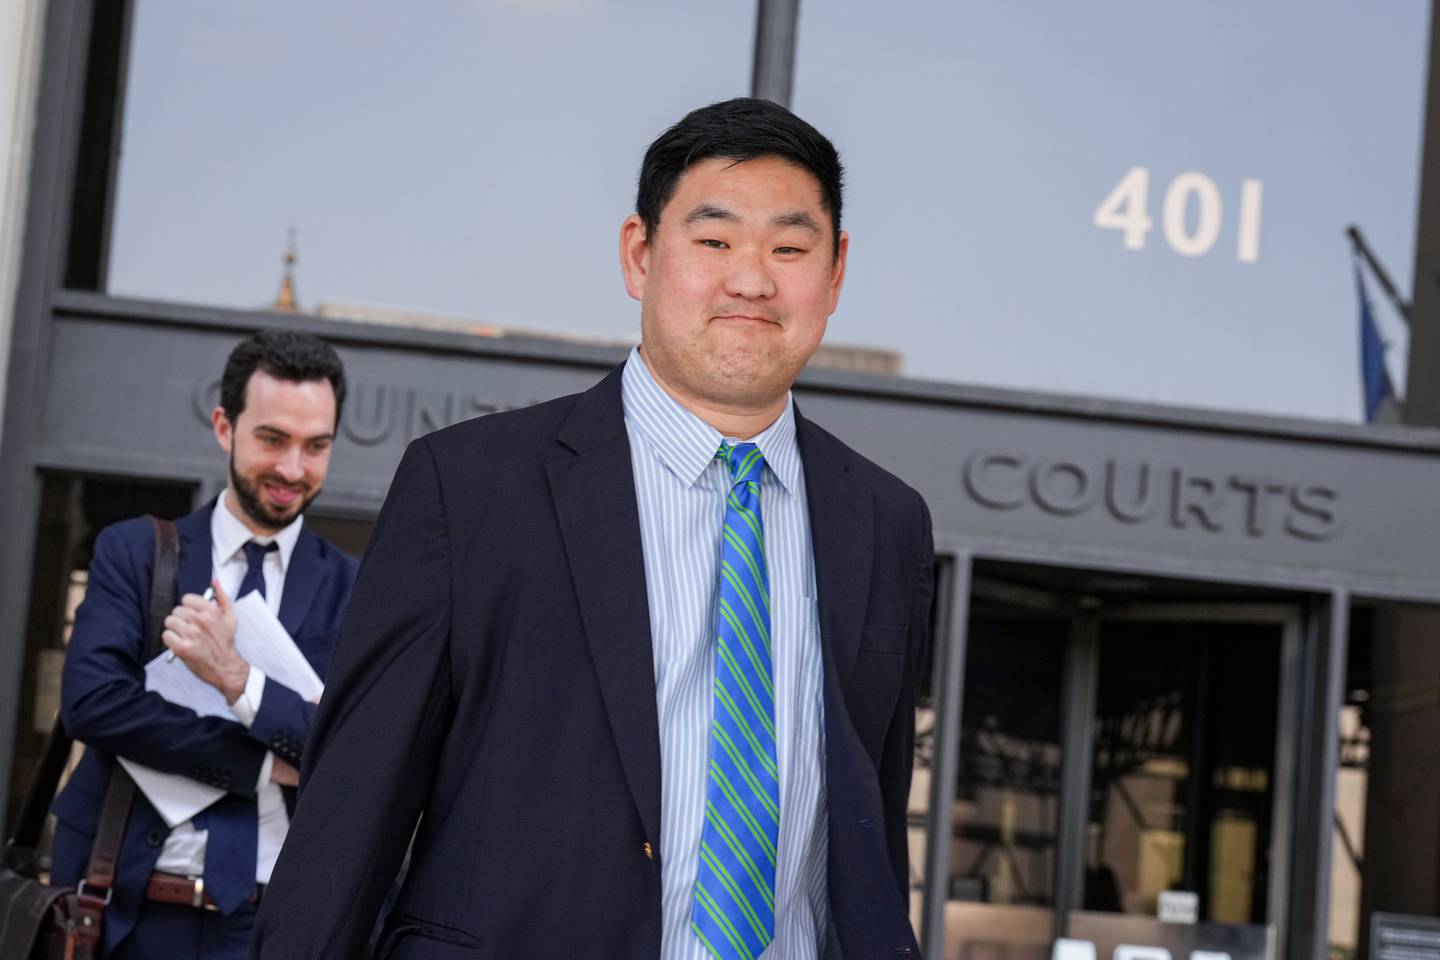 Chris Bendann, 39, exits the Baltimore County Courthouse in Towson with his legal team after a hearing on Tuesday, July 18, 2023. The former Gilman School teacher is accused of sexually abusing a student between 2016 and 2019, and was indicted on 16 counts including sexual abuse of a minor, rape and related offenses.